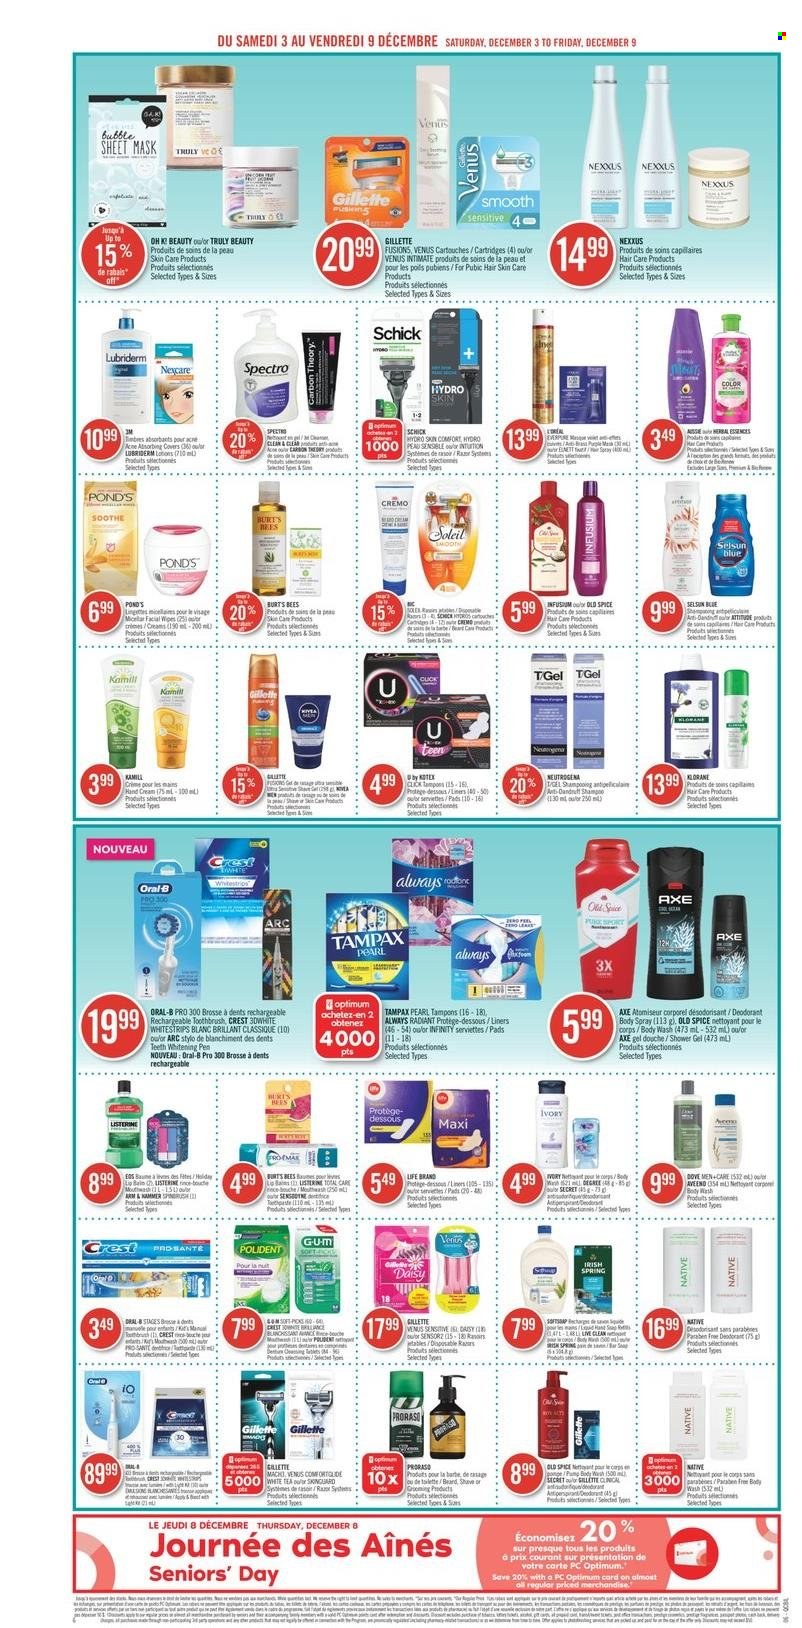 thumbnail - Pharmaprix Flyer - December 03, 2022 - December 09, 2022 - Sales products - Dove, ARM & HAMMER, spice, TRULY, wipes, Nivea, body wash, shower gel, POND'S, toothbrush, toothpaste, mouthwash, Polident, Crest, Kotex, tampons, Gillette, Clean & Clear, Infinity, Nexxus, Klorane, body spray, Lubriderm, hand cream, anti-perspirant, Axe, Schick, Venus, pen, Optimum, TV, Listerine, Neutrogena, shampoo, Tampax, Old Spice, Oral-B, deodorant. Page 10.